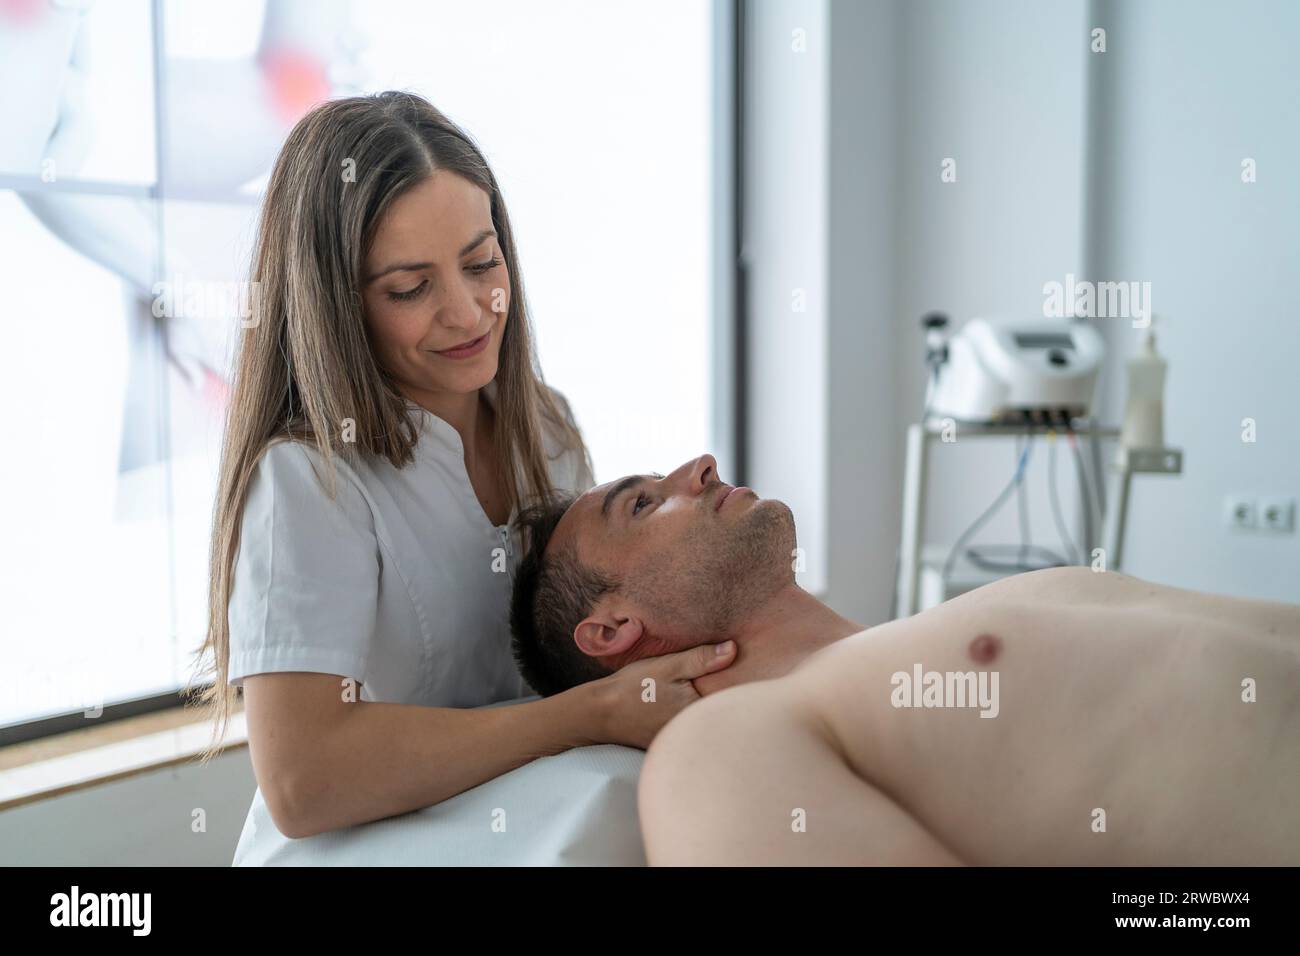 Positive young female therapist in white uniform smiling and massaging neck of calm male patient lying on table without shirt during physiotherapy ses Stock Photo